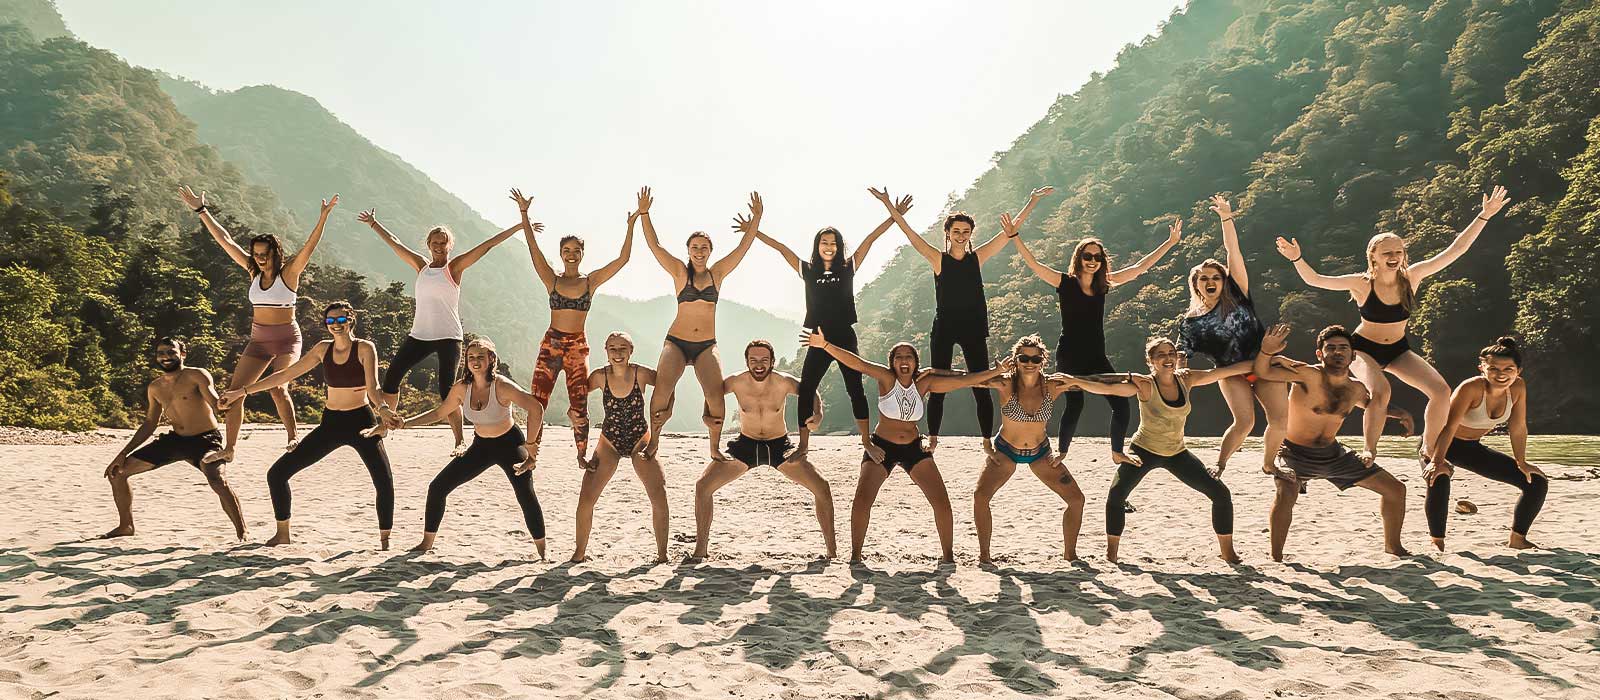 Yoga students lined up on the beach posing for a picture with their fellow students during a yoga teacher training in Rishikesh, India.